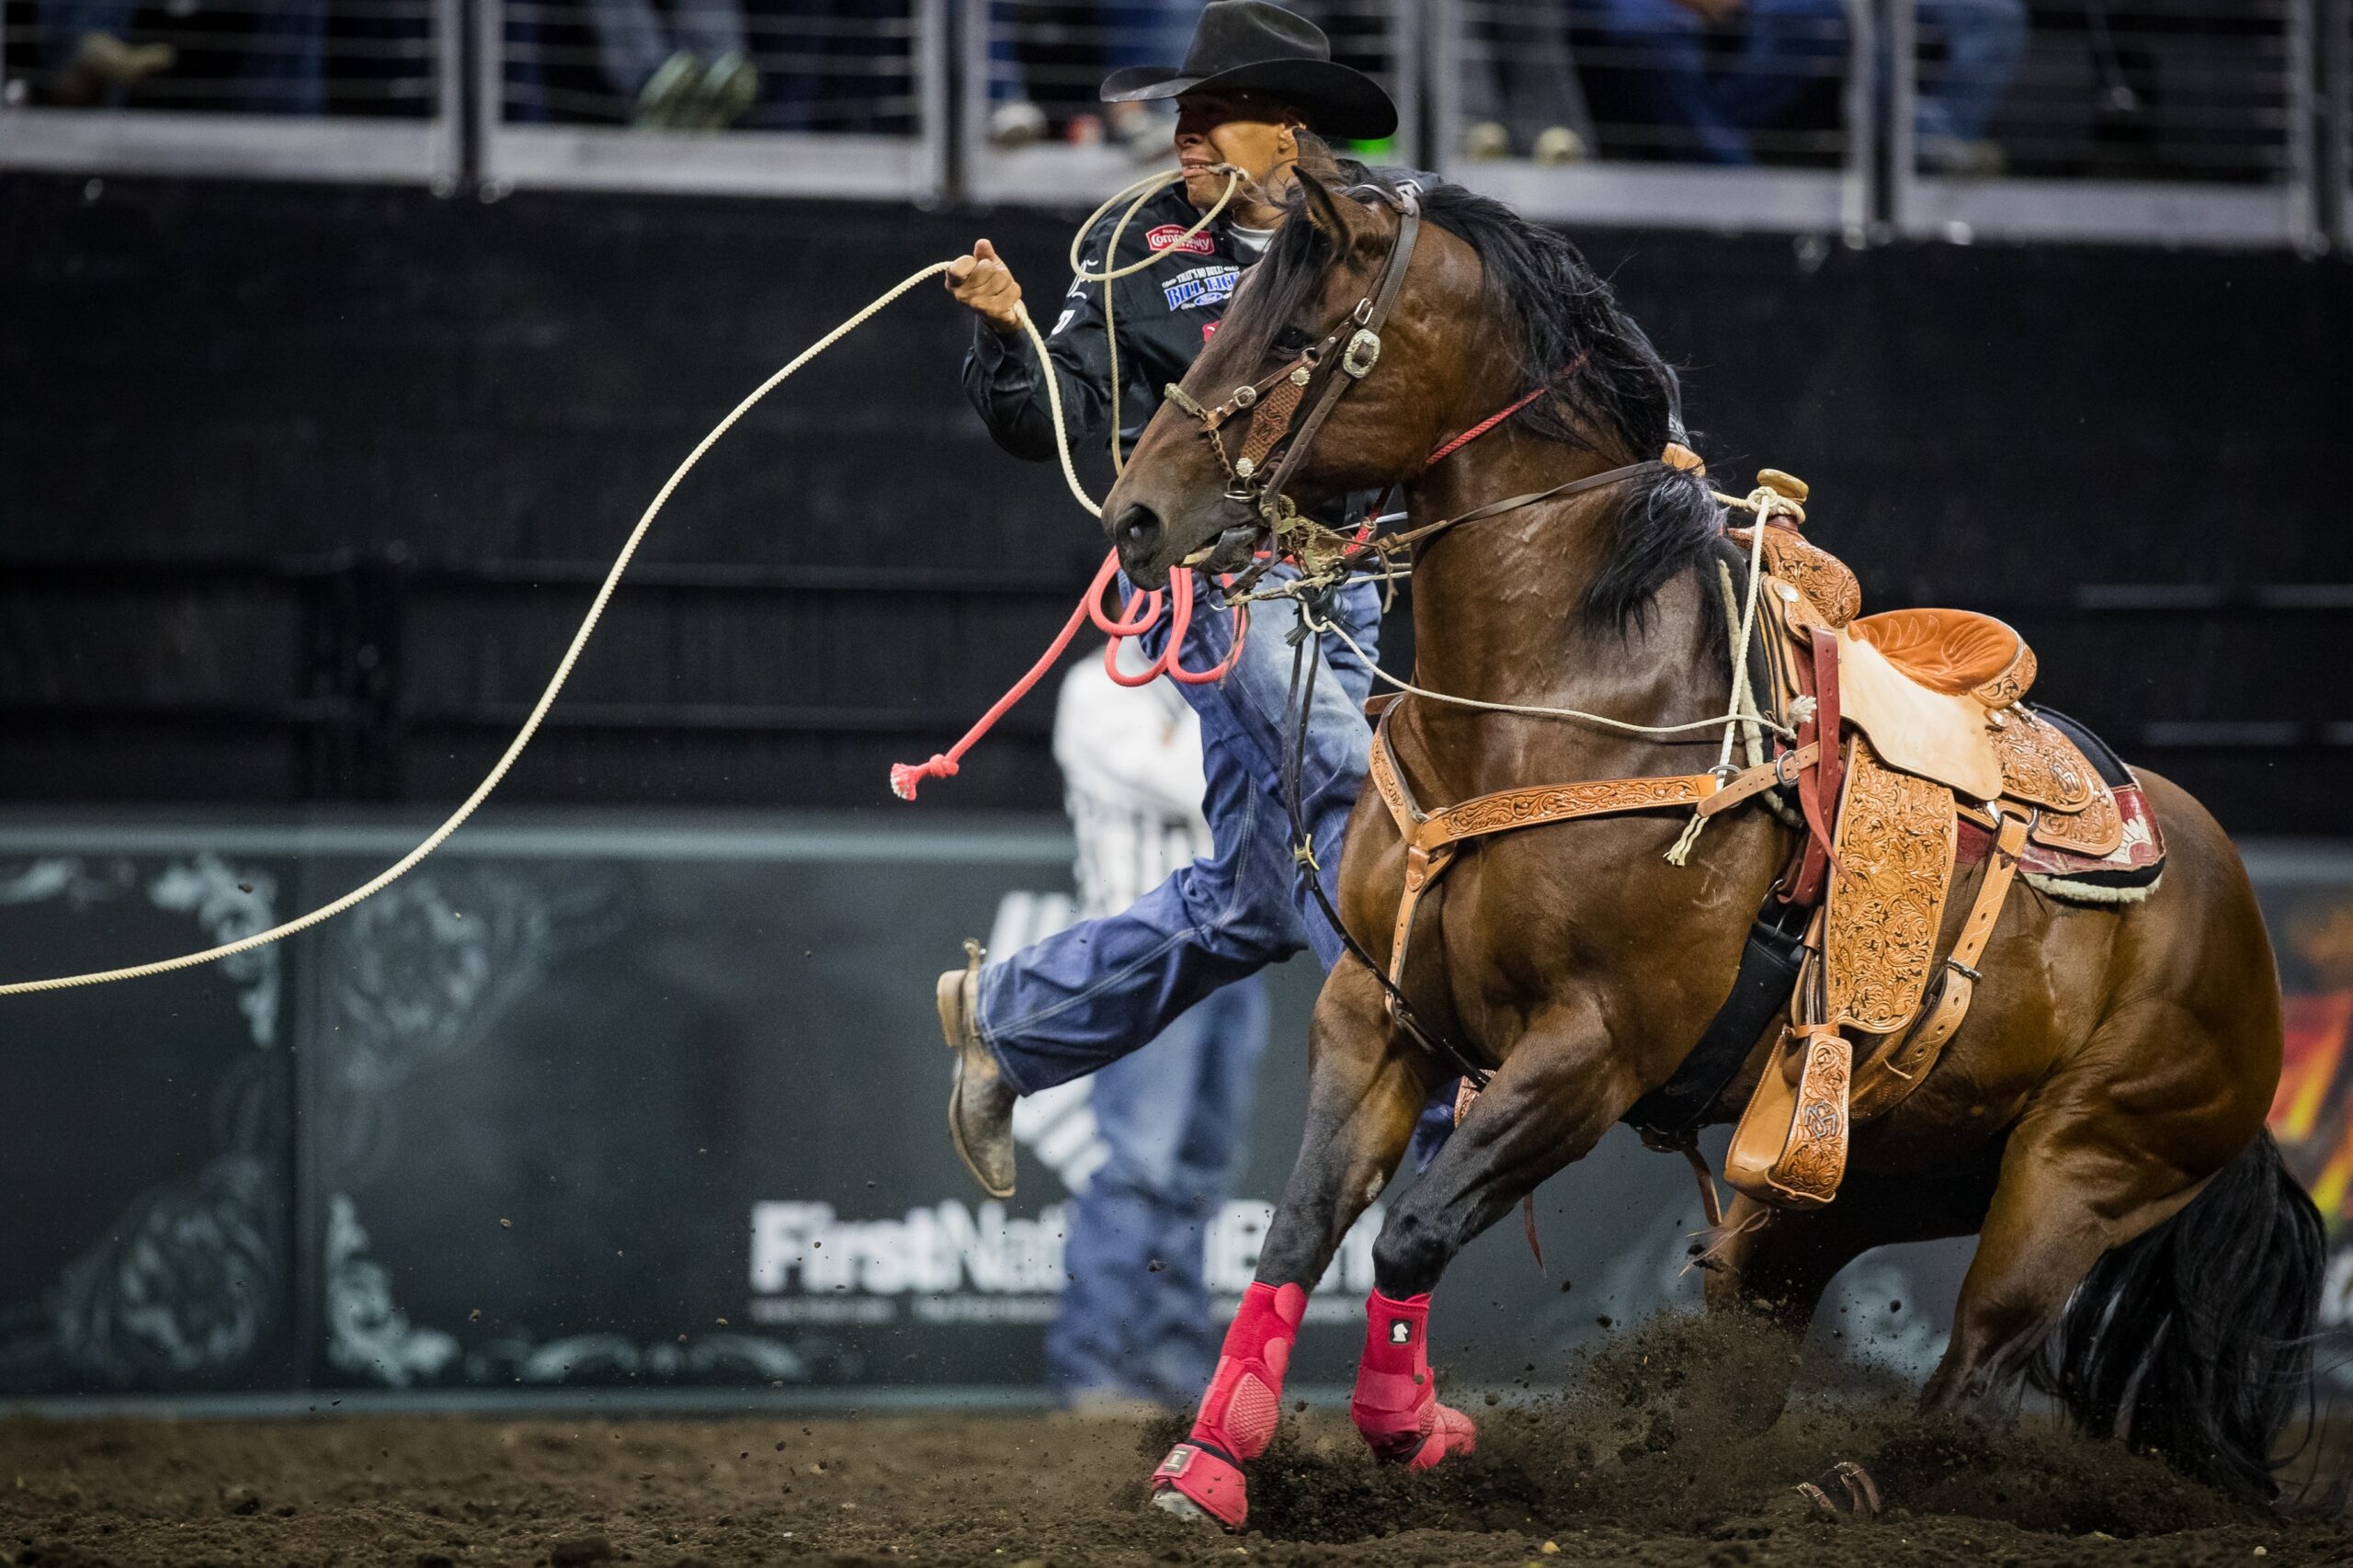 Shad Mayfield stepping off his horse to tie down his calf in the four-man round in Sioux Falls at the 2023 Cinch Playoffs Governor's Cup.